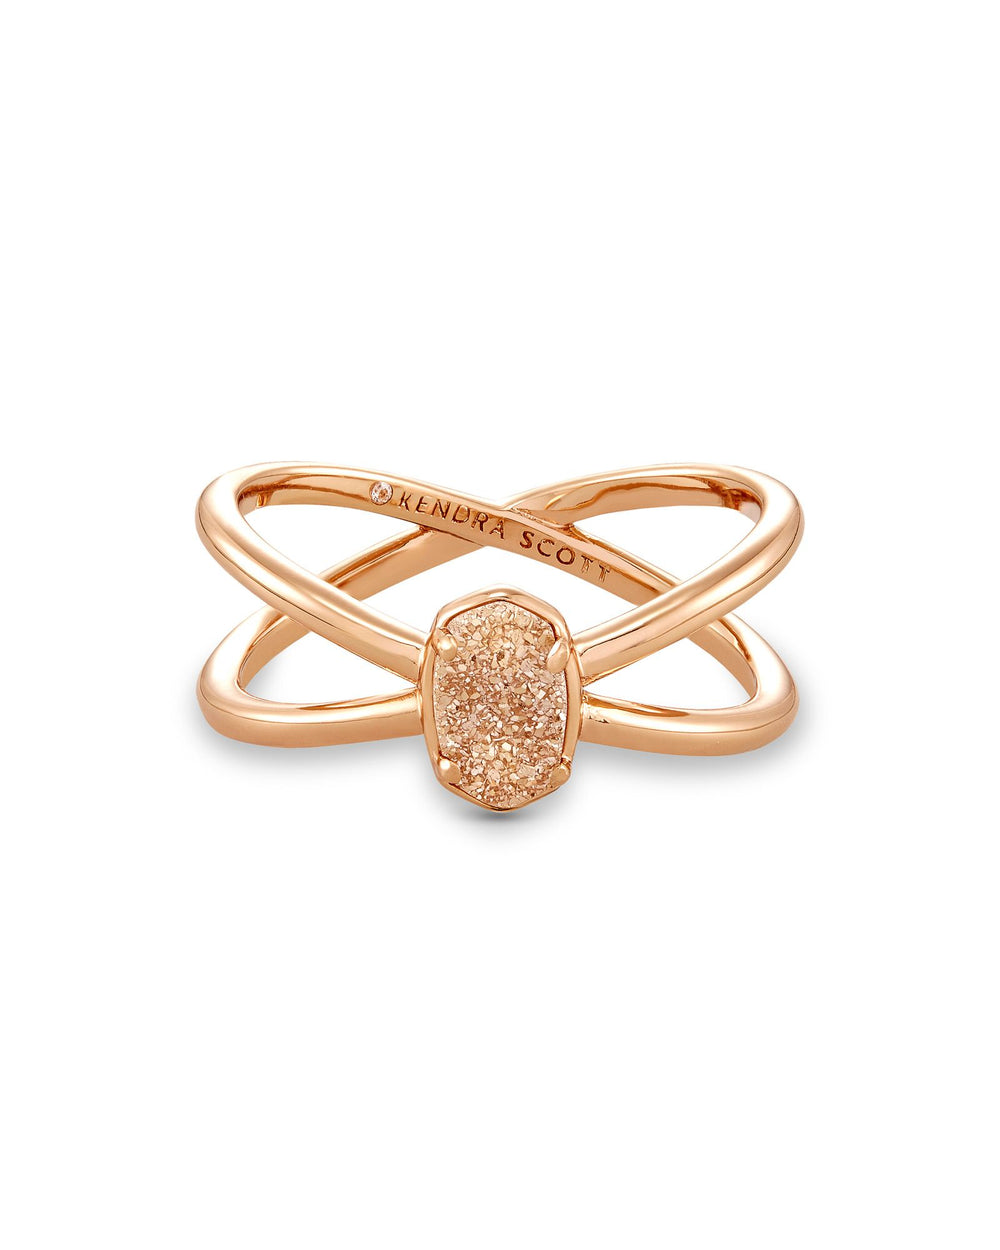 Emilie Double Band Ring - Rose Gold Sand Drusy